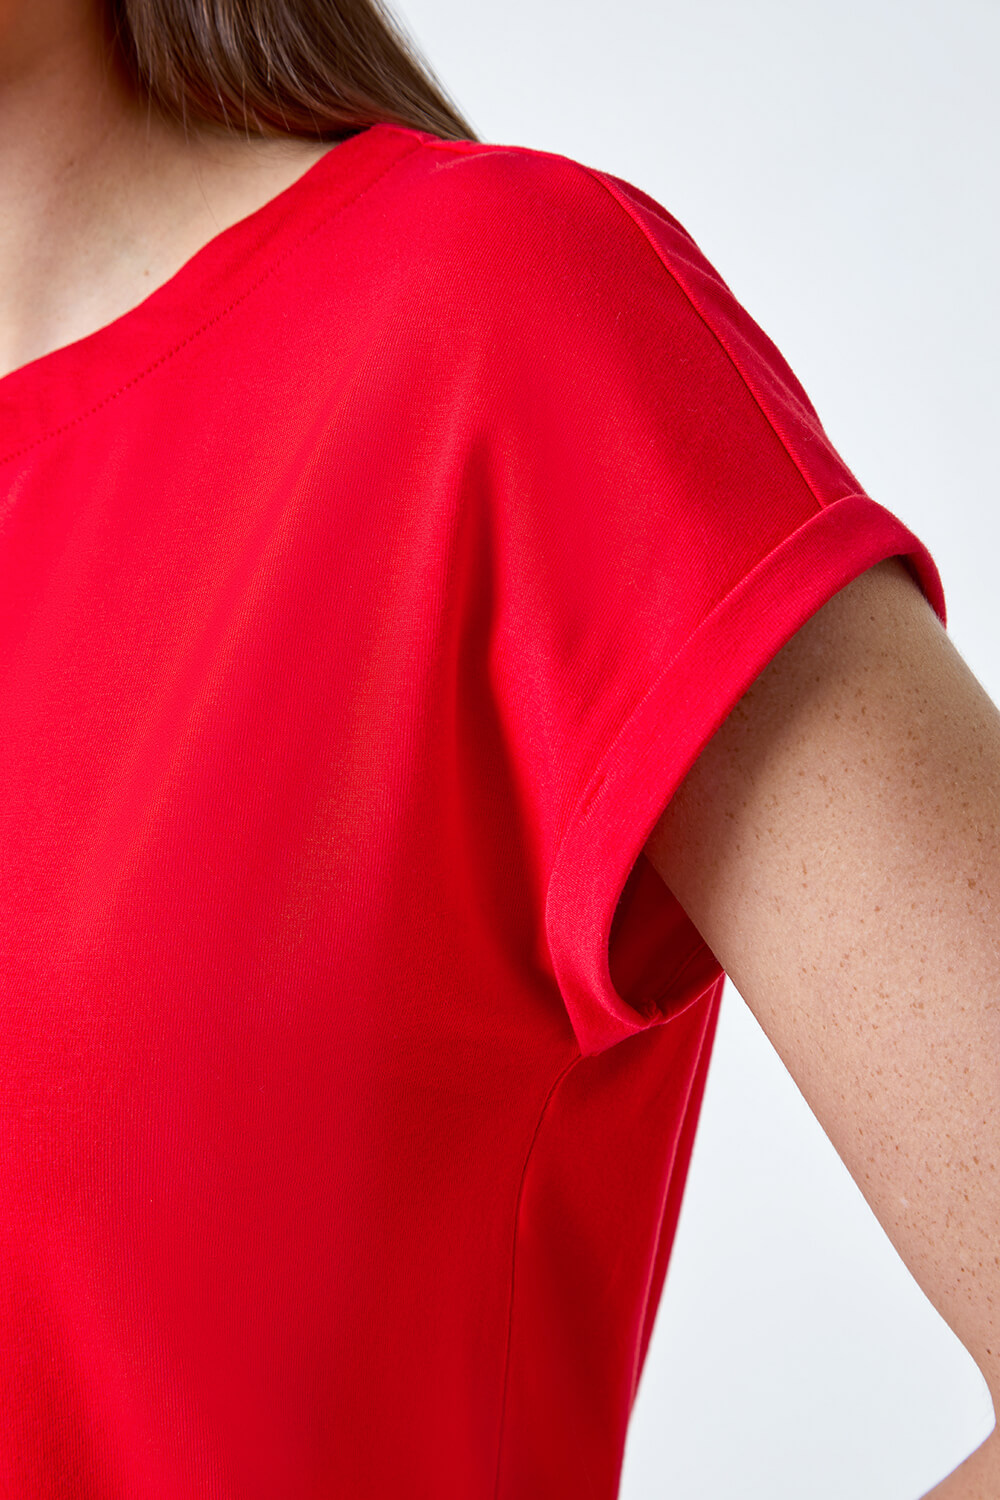 Red Plain Stretch Cotton Jersey T-Shirt, Image 5 of 5